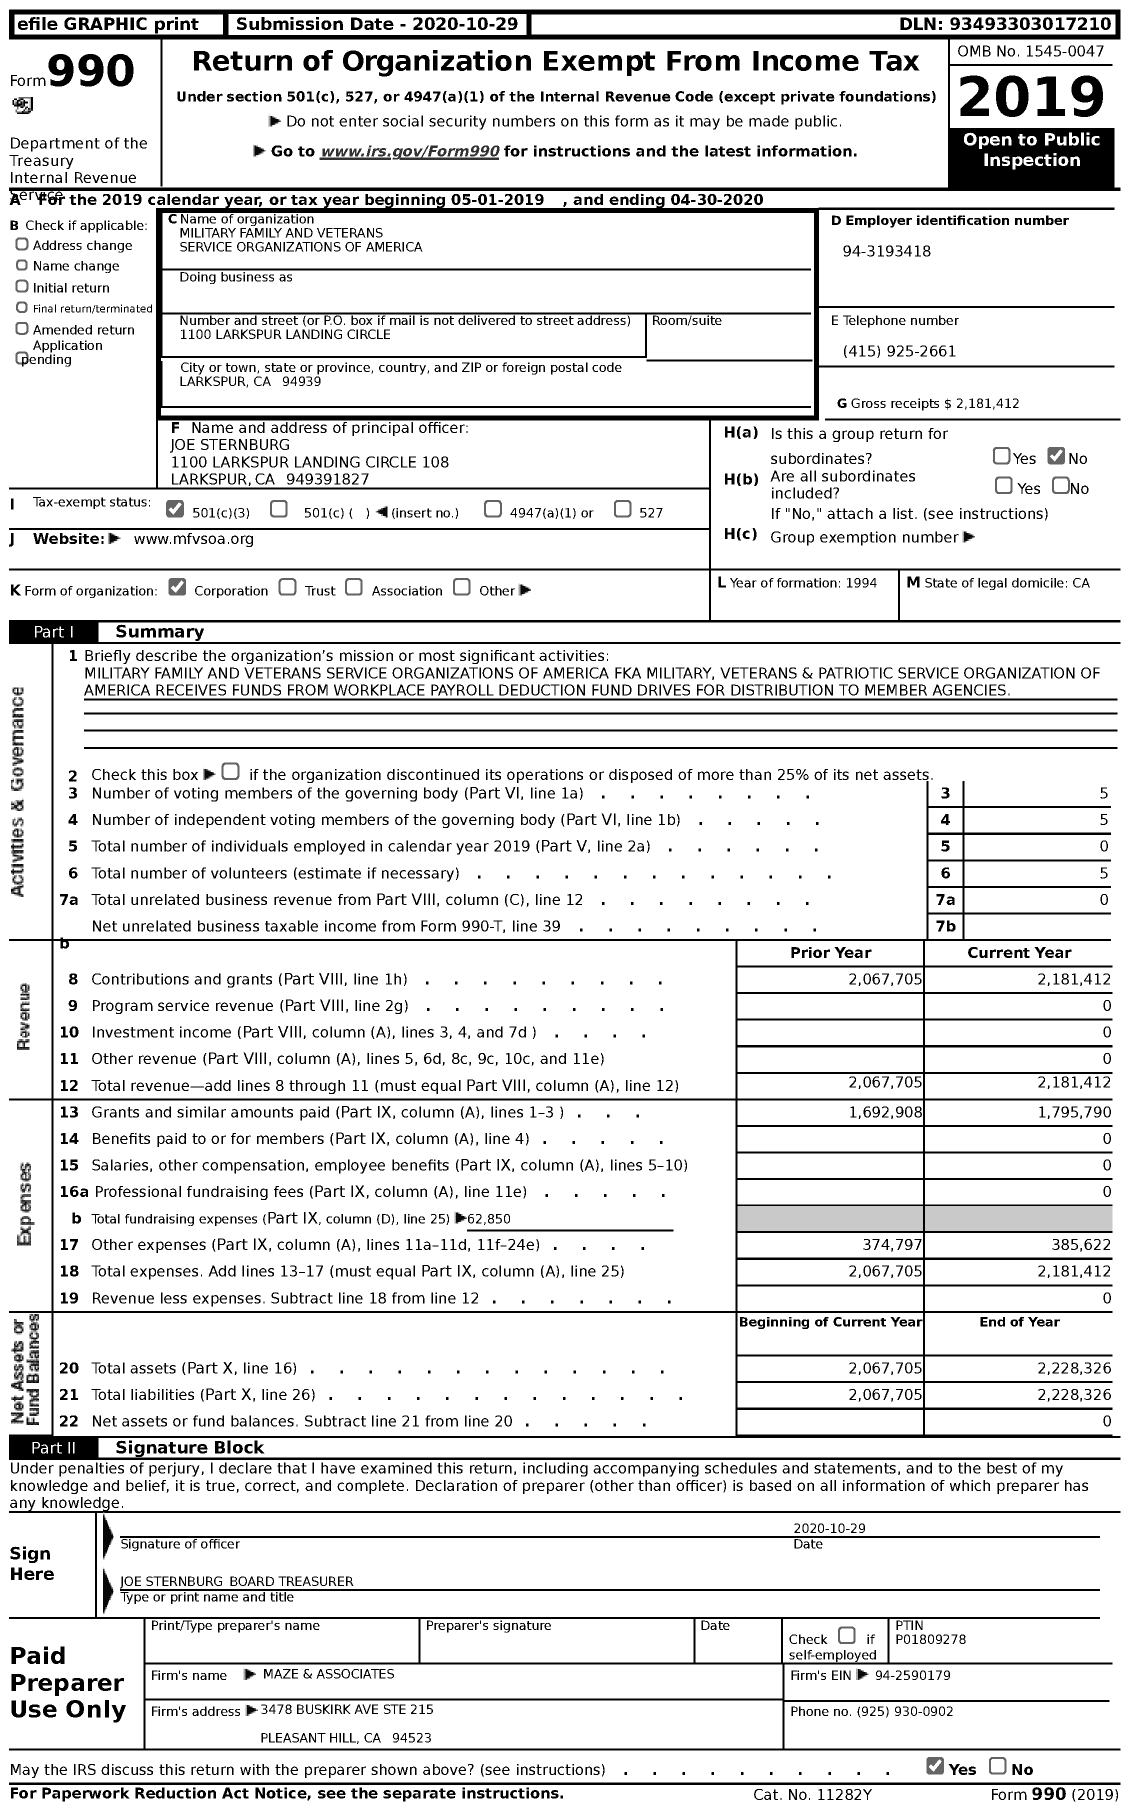 Image of first page of 2019 Form 990 for Military Family and Veterans Service Organizations of America (MFVSOA)